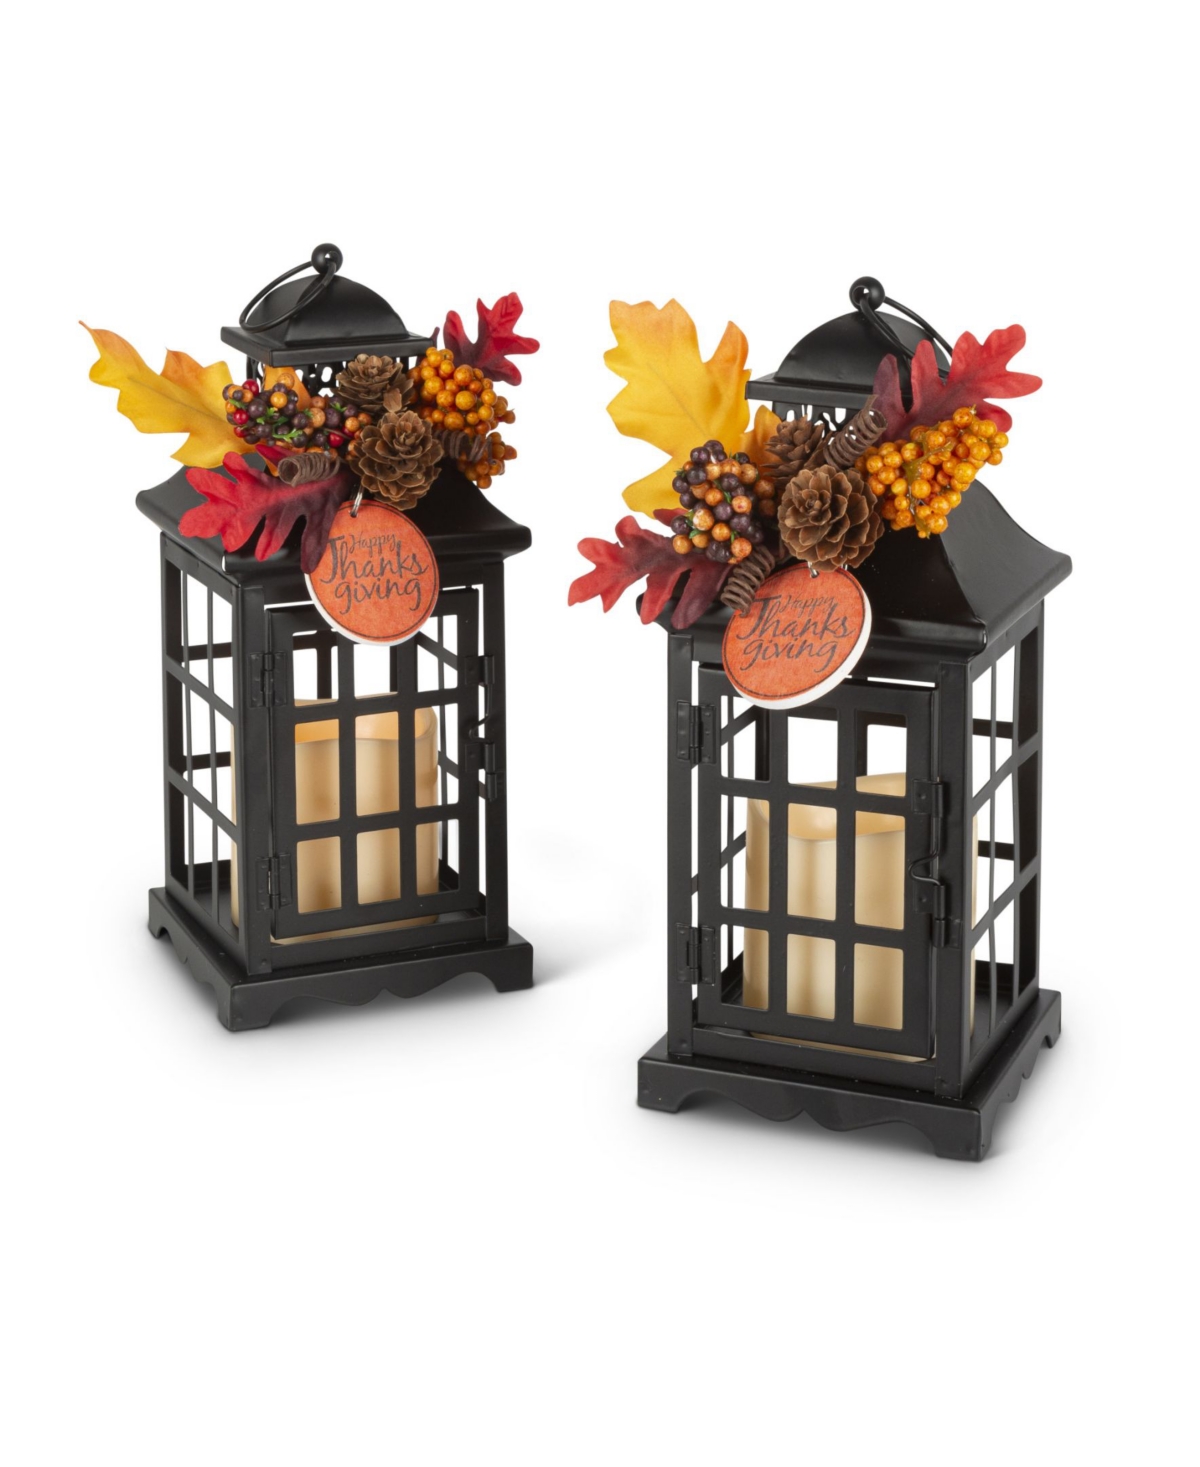 10.5" Lanterns with Battery Operated Led Candles and Floral Accents Set, 2 Pieces - Black